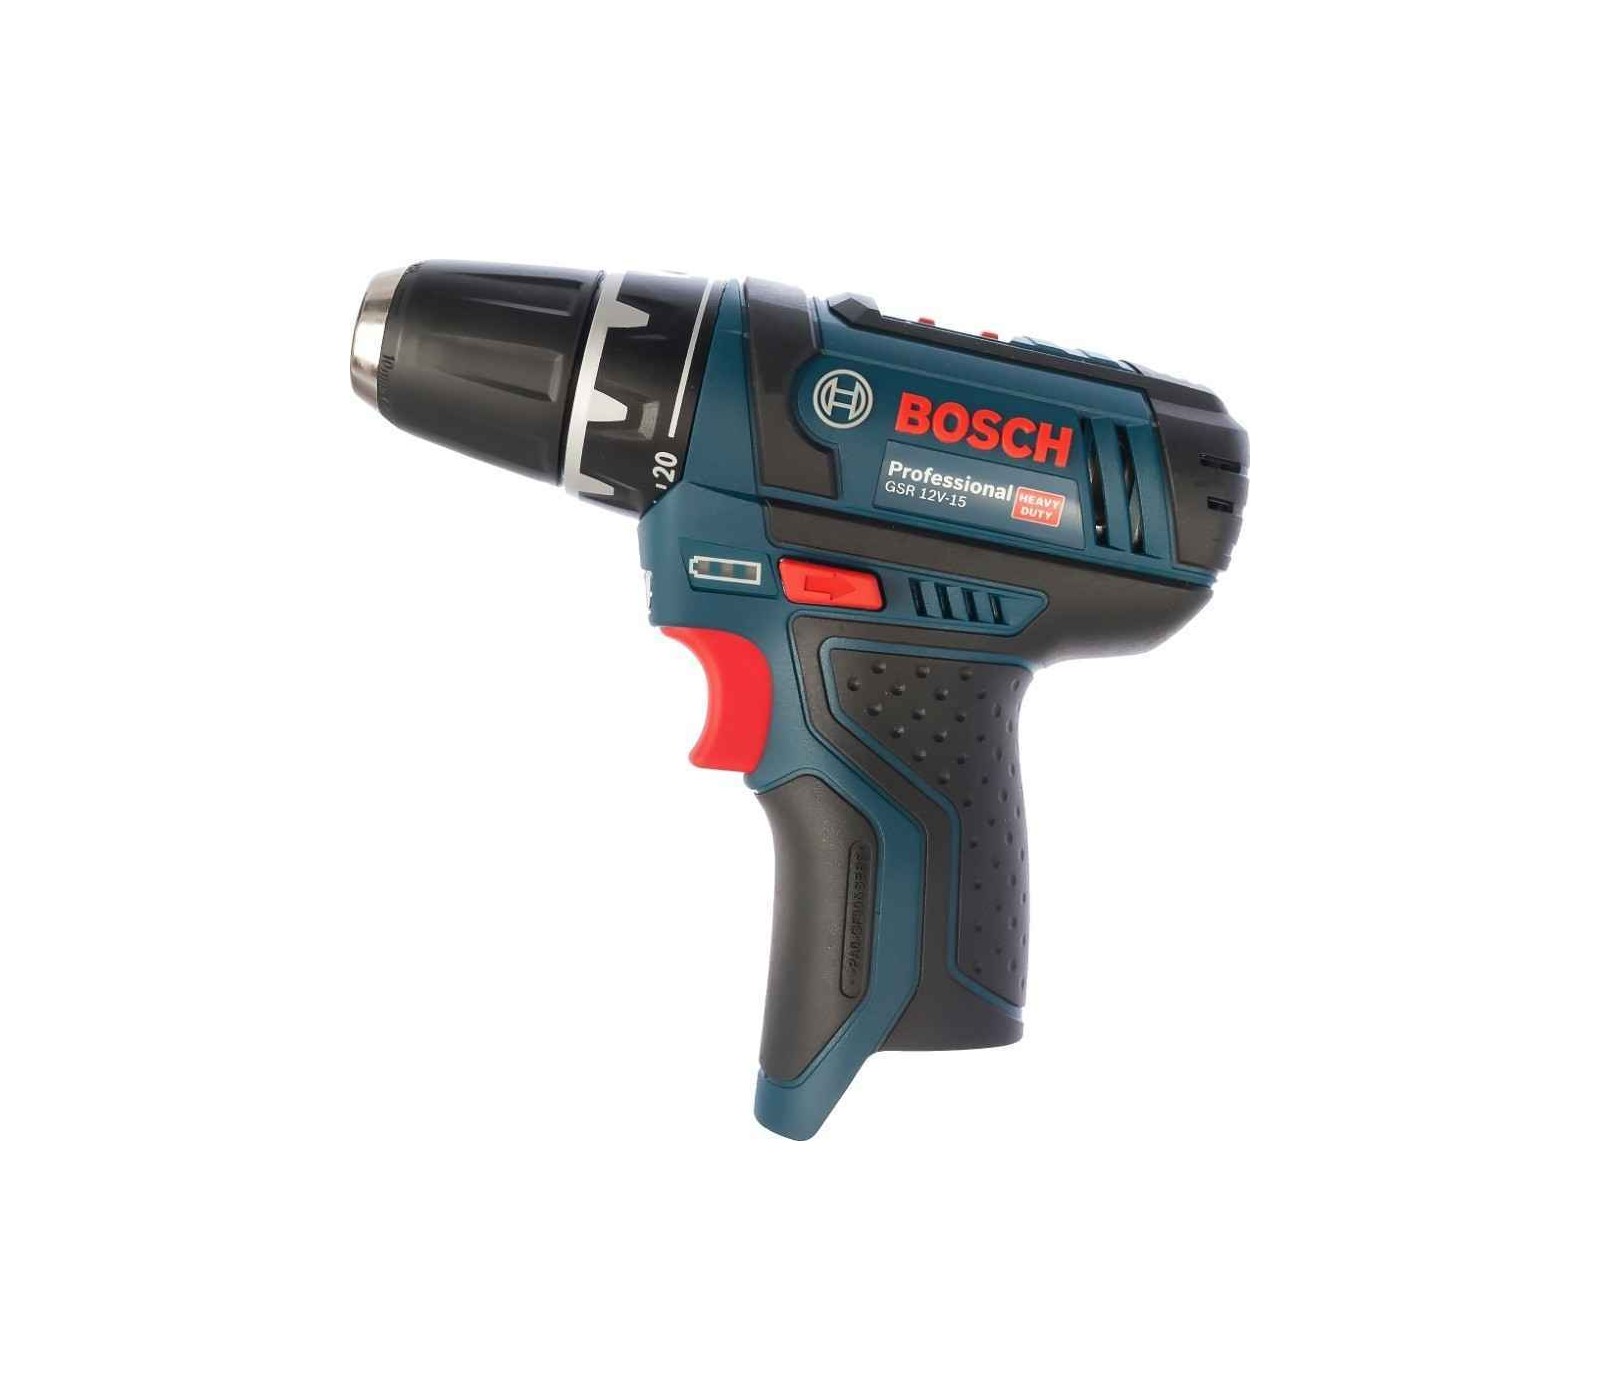 https://dohotools.com/2218-large_default/cordless-screwdriver-bosch-gsr-12v-15-12-v-carrying-case-without-battery-and-charger.jpg